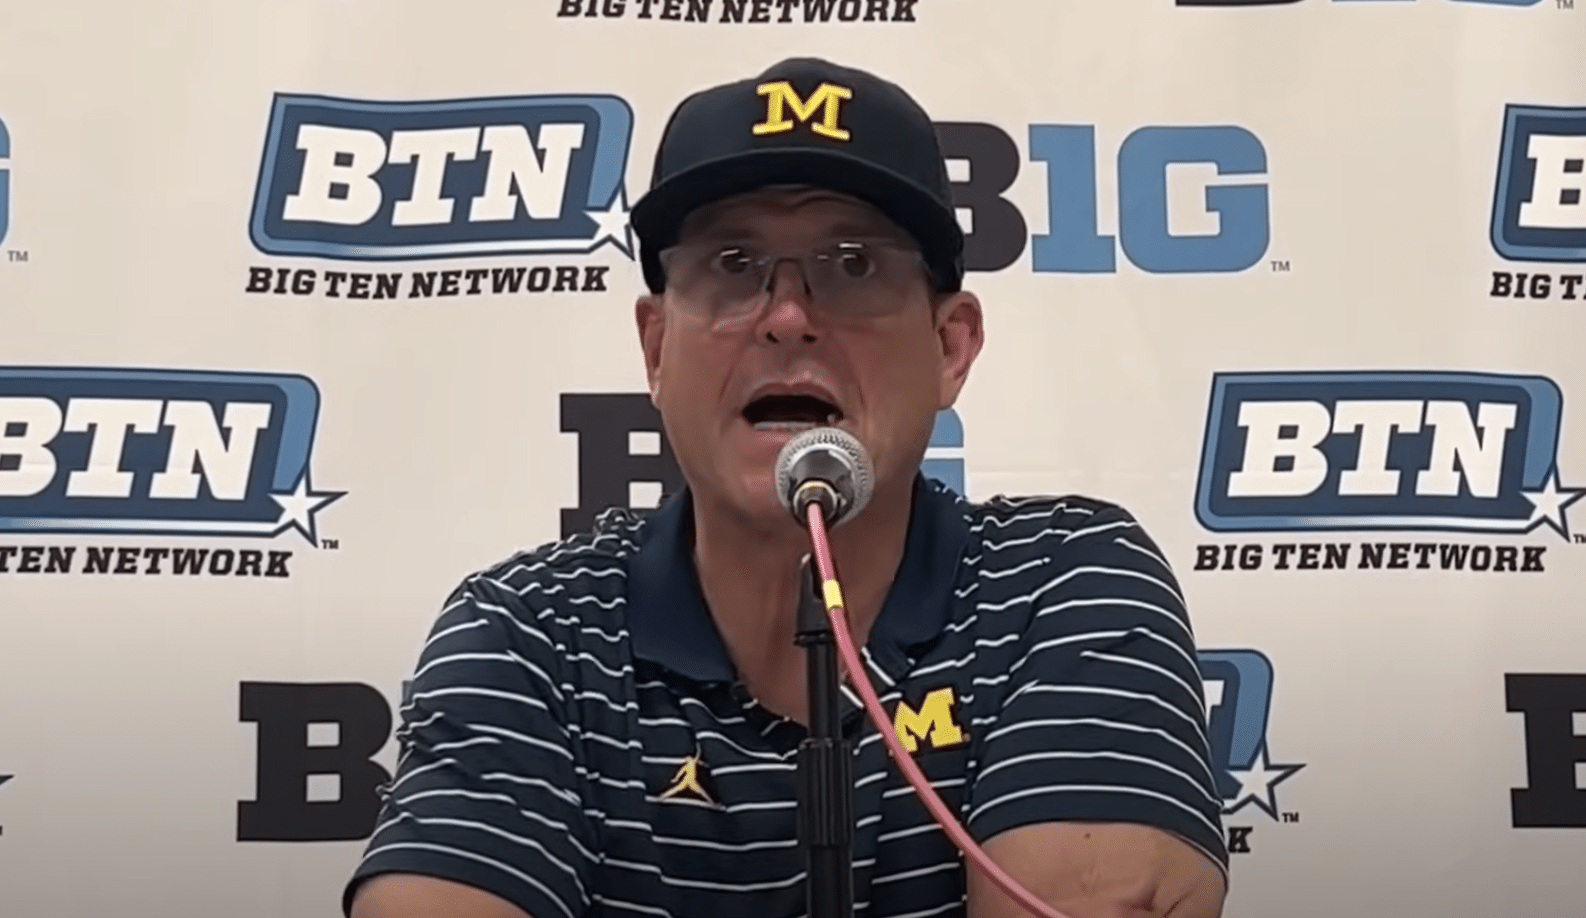 Jim Harbaugh explains Jim Harbaugh comments on rumor about a new contract Jim Harbaugh makes BOLD statement Jim Harbaugh responds to question about latest controversy with Michigan Football program